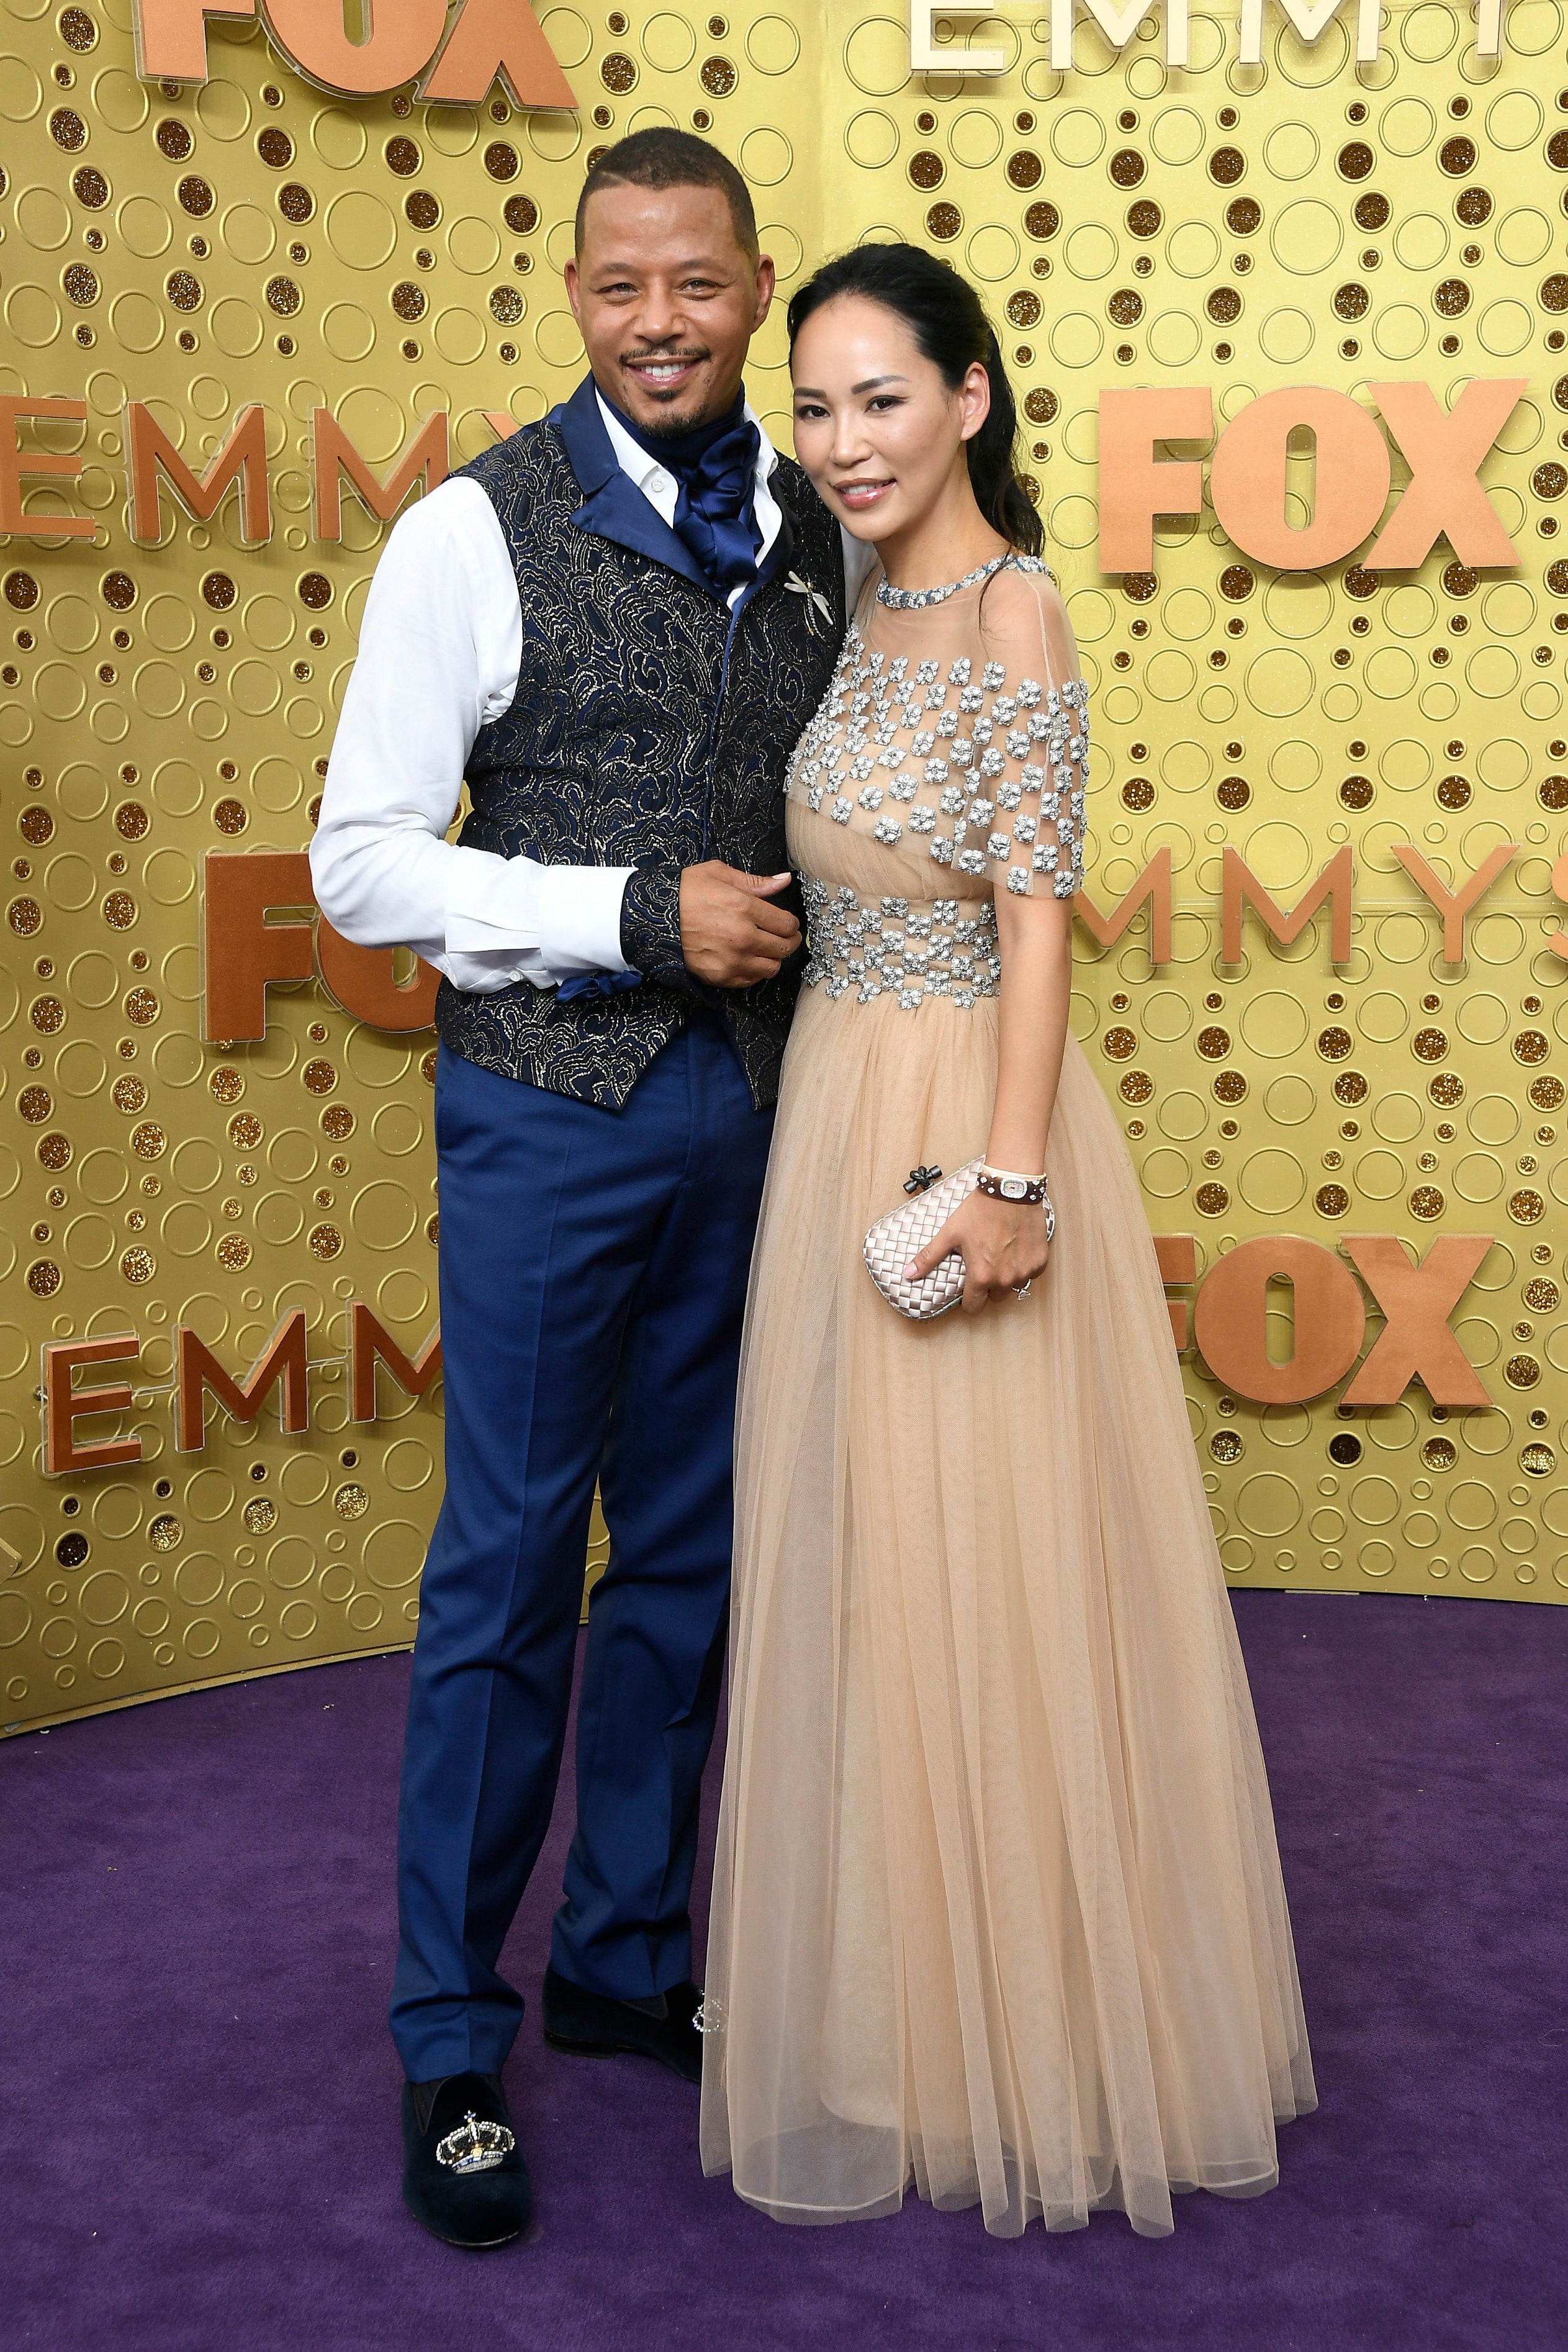 The Best Fashion On The 2019 Emmys Red Carpet